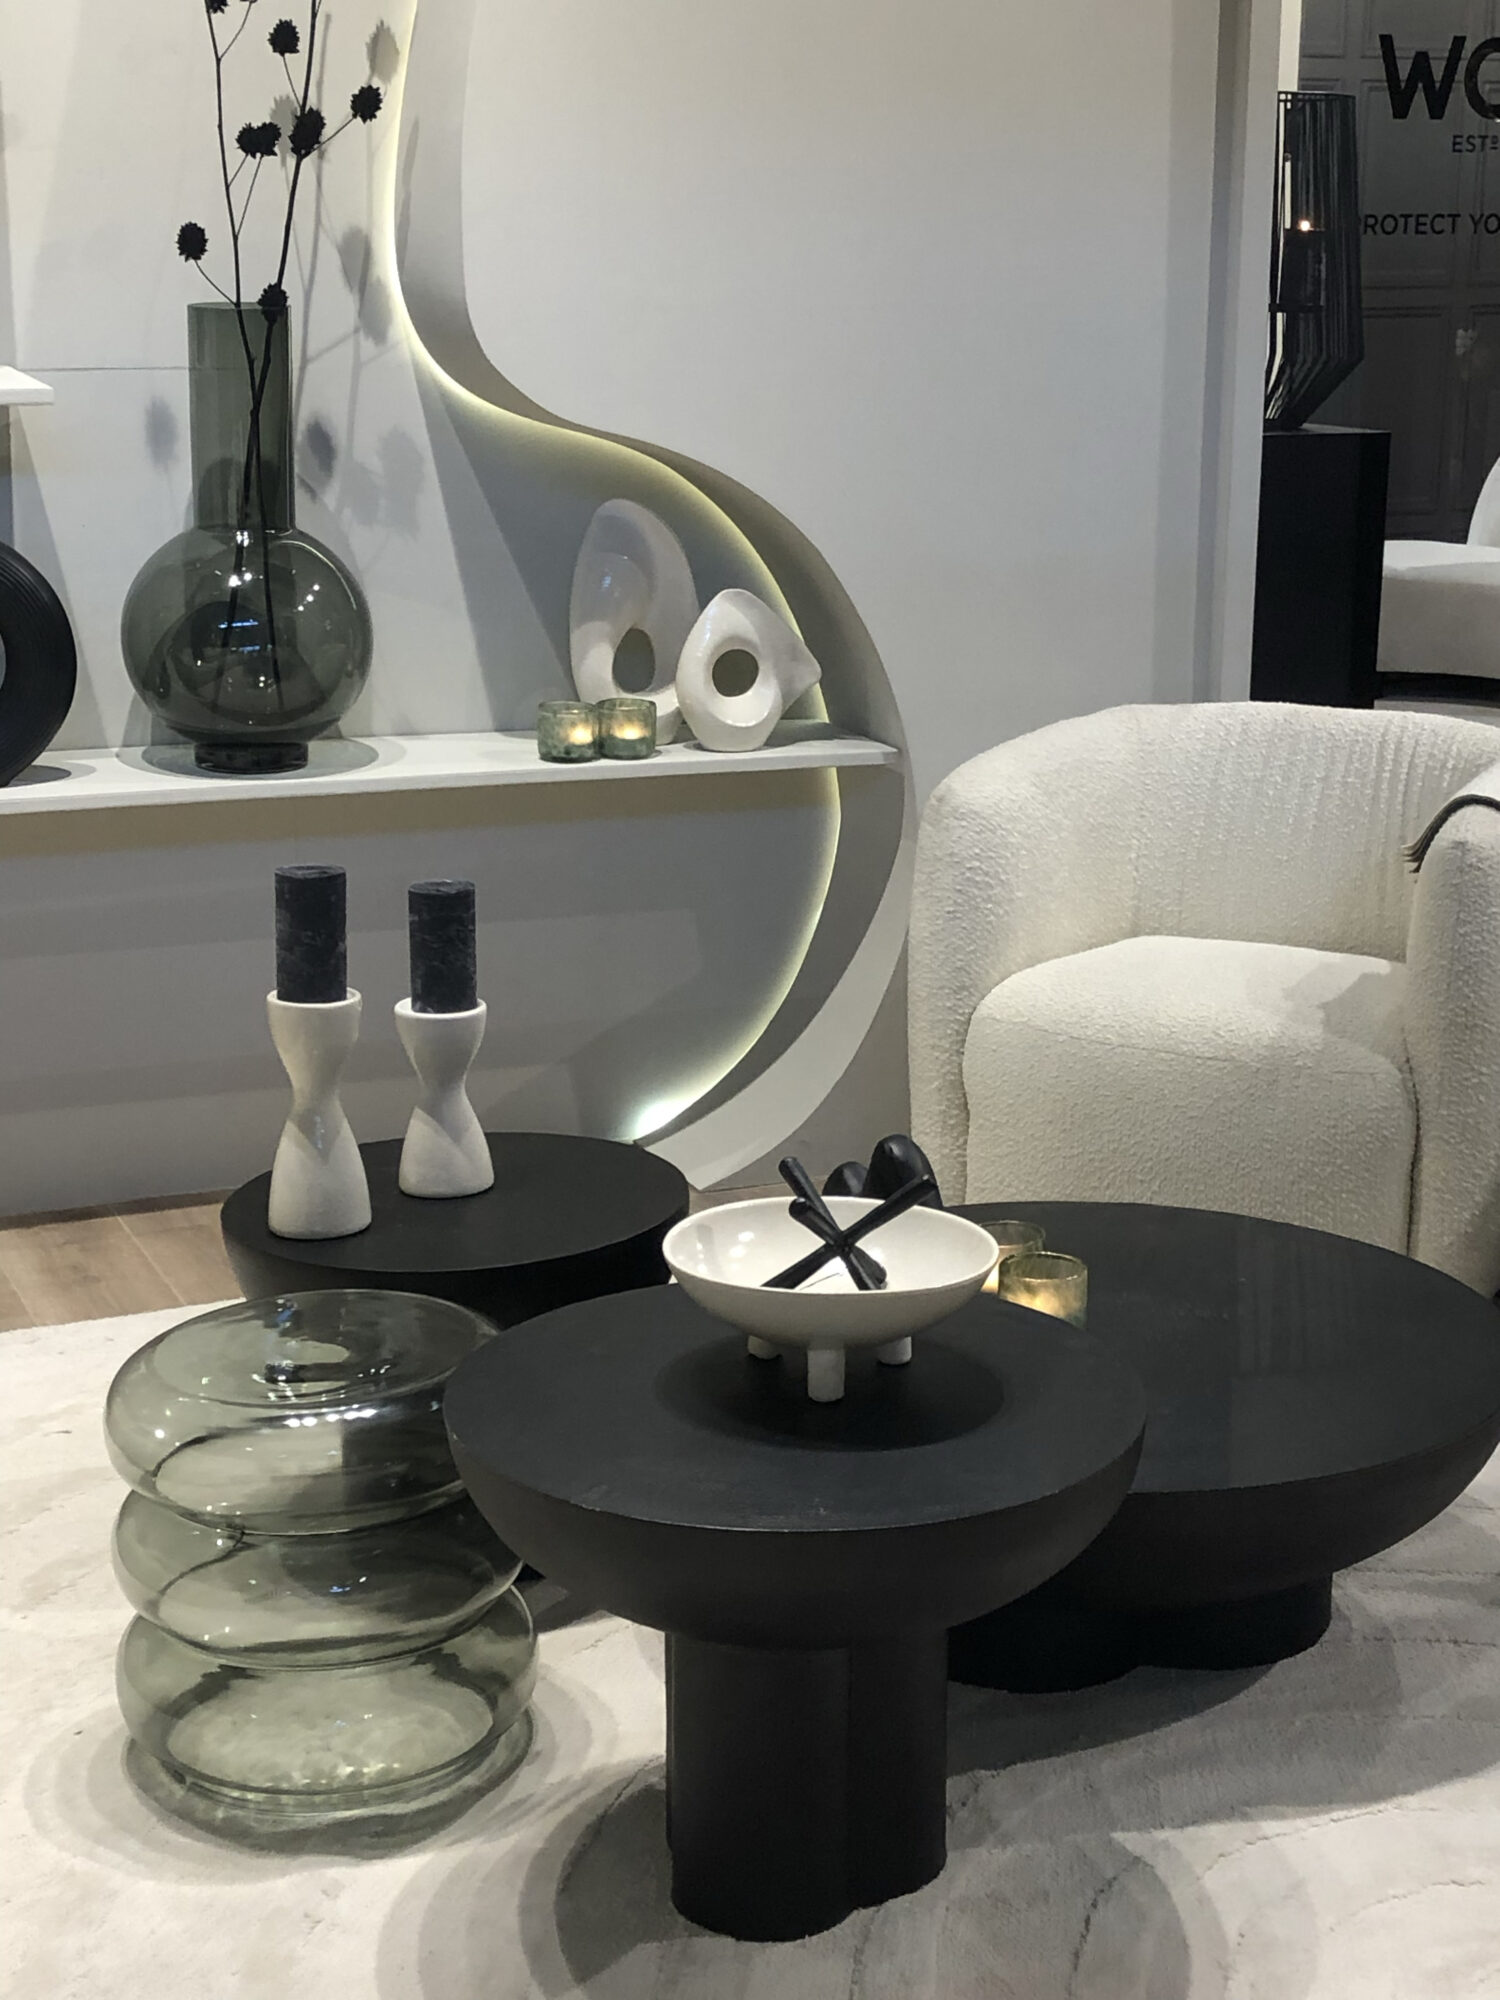 black nesting table with white armchair in background